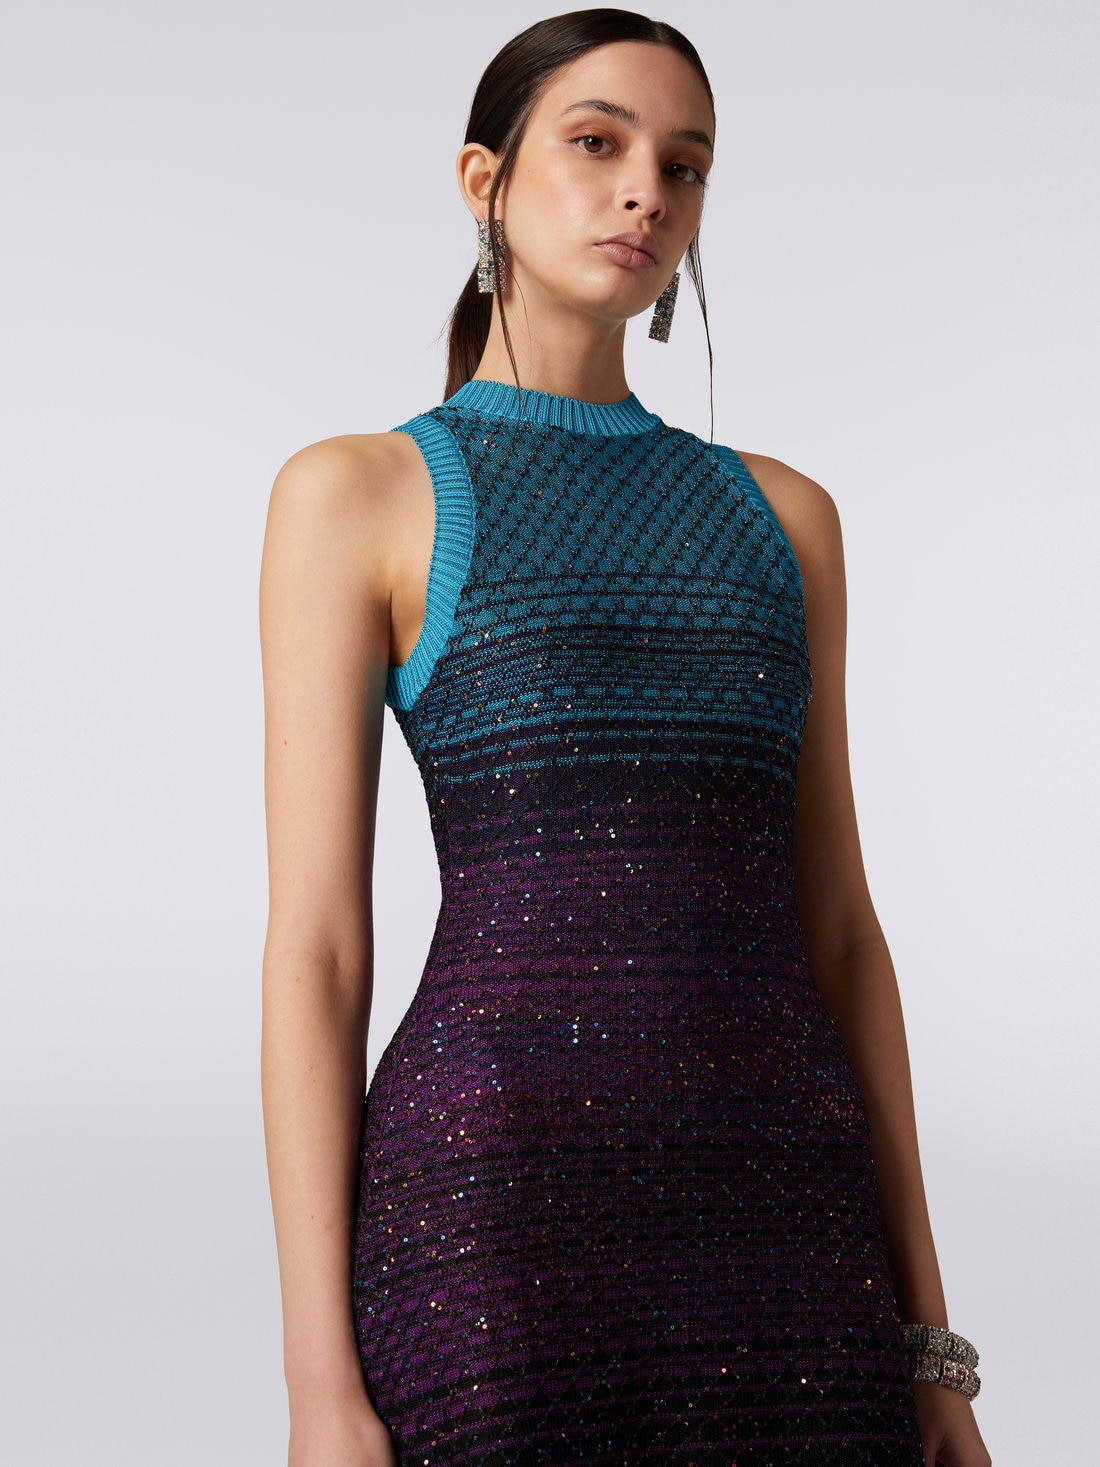 Sleeveless mesh dress with sequins, Turquoise, Purple & Black - DS23SG28BK022ISM8NJ - 4